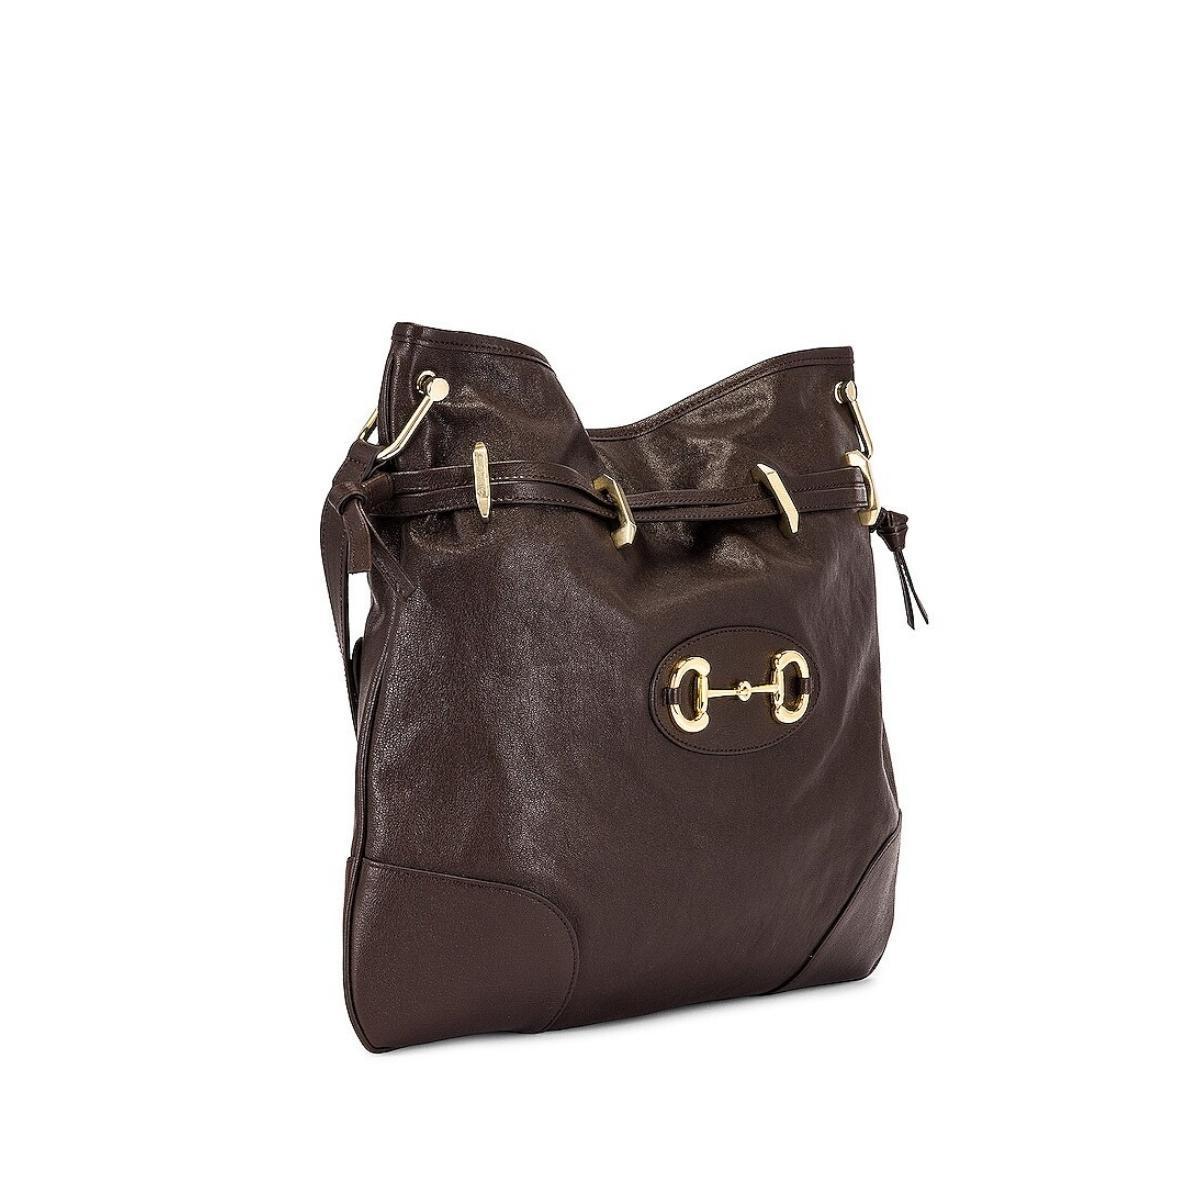 Gucci 1955 Horsebit Shoulder Bag In New Condition For Sale In Brossard, QC